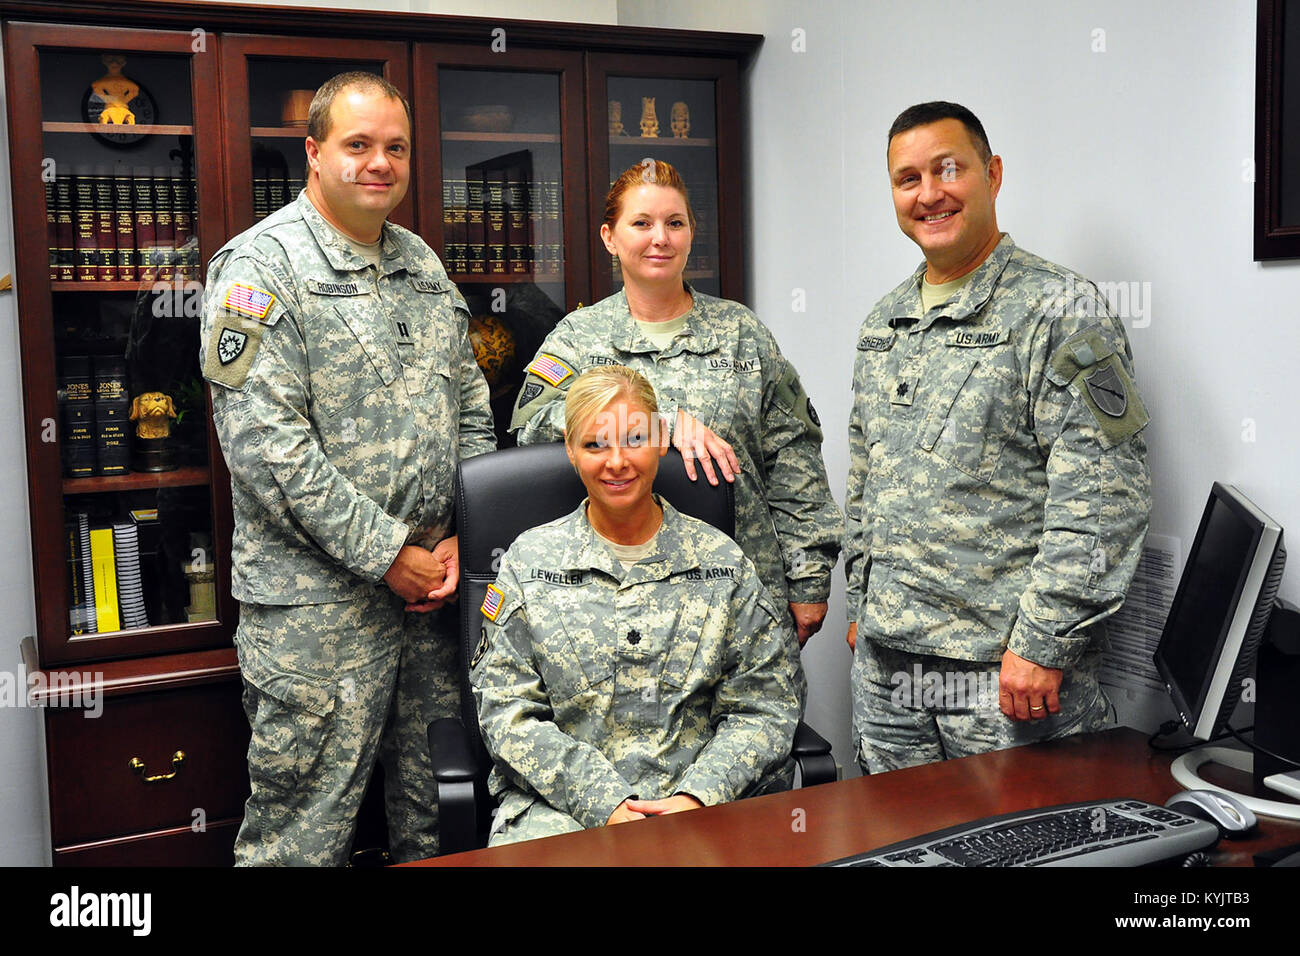 The Kentucky National Guard's Staff Judge Advocate General, Lt. Col. Natalie Lewellen (seated), (L-R) Capt. Spencer Robinson, Staff Sgt. Paulette Terry and Lt. Col. Jason Shepherd. The team works to provide legal counsel to the Kentucky Guard. (U.S. Army National Guard photo by Staff Sgt. Scott Raymond) Stock Photo